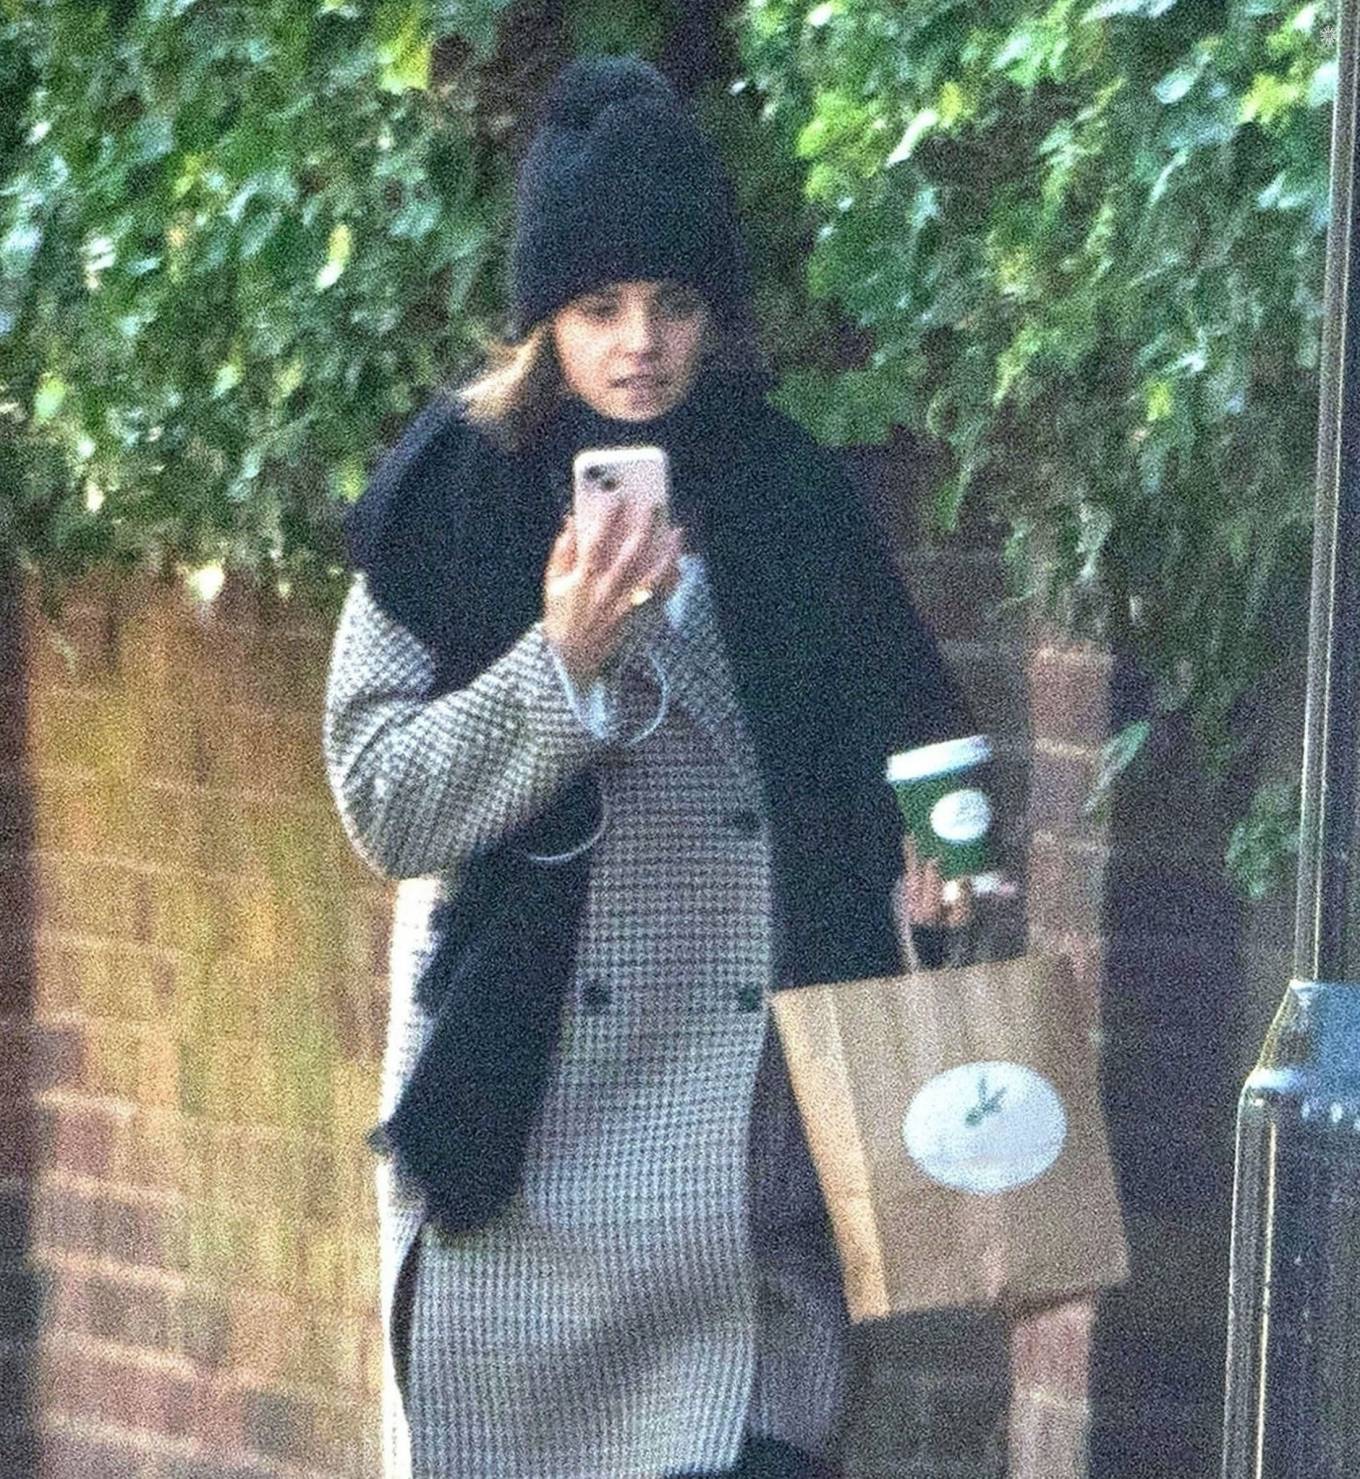 Emma Watson - Takes a Facetime call while out for a walk in London